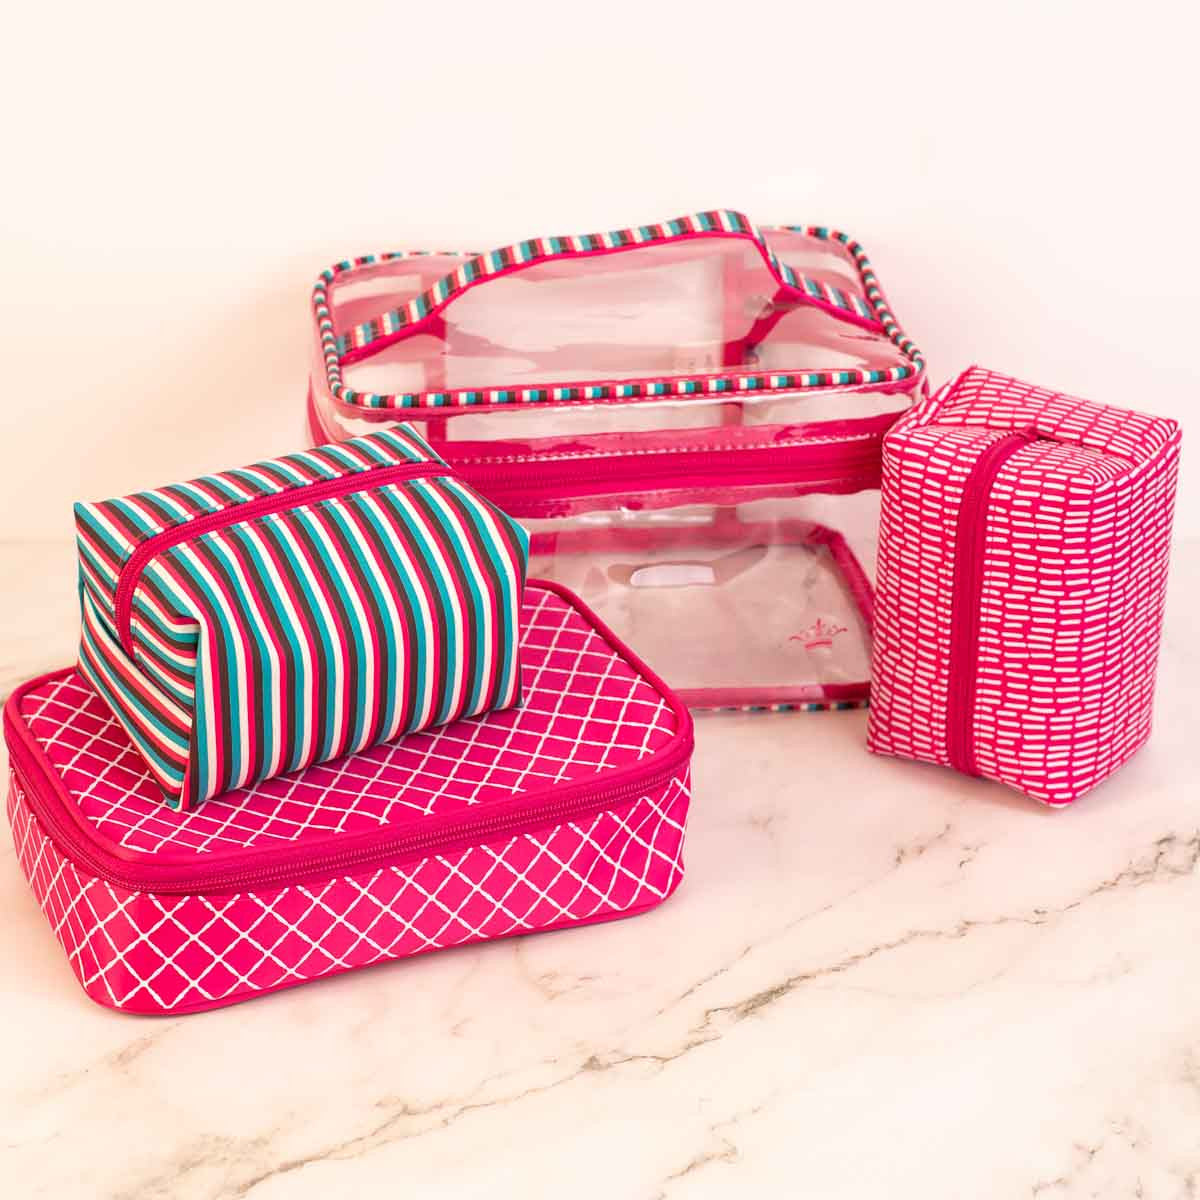 Wanderlust Gift Set in Hot Pink/Turquoise